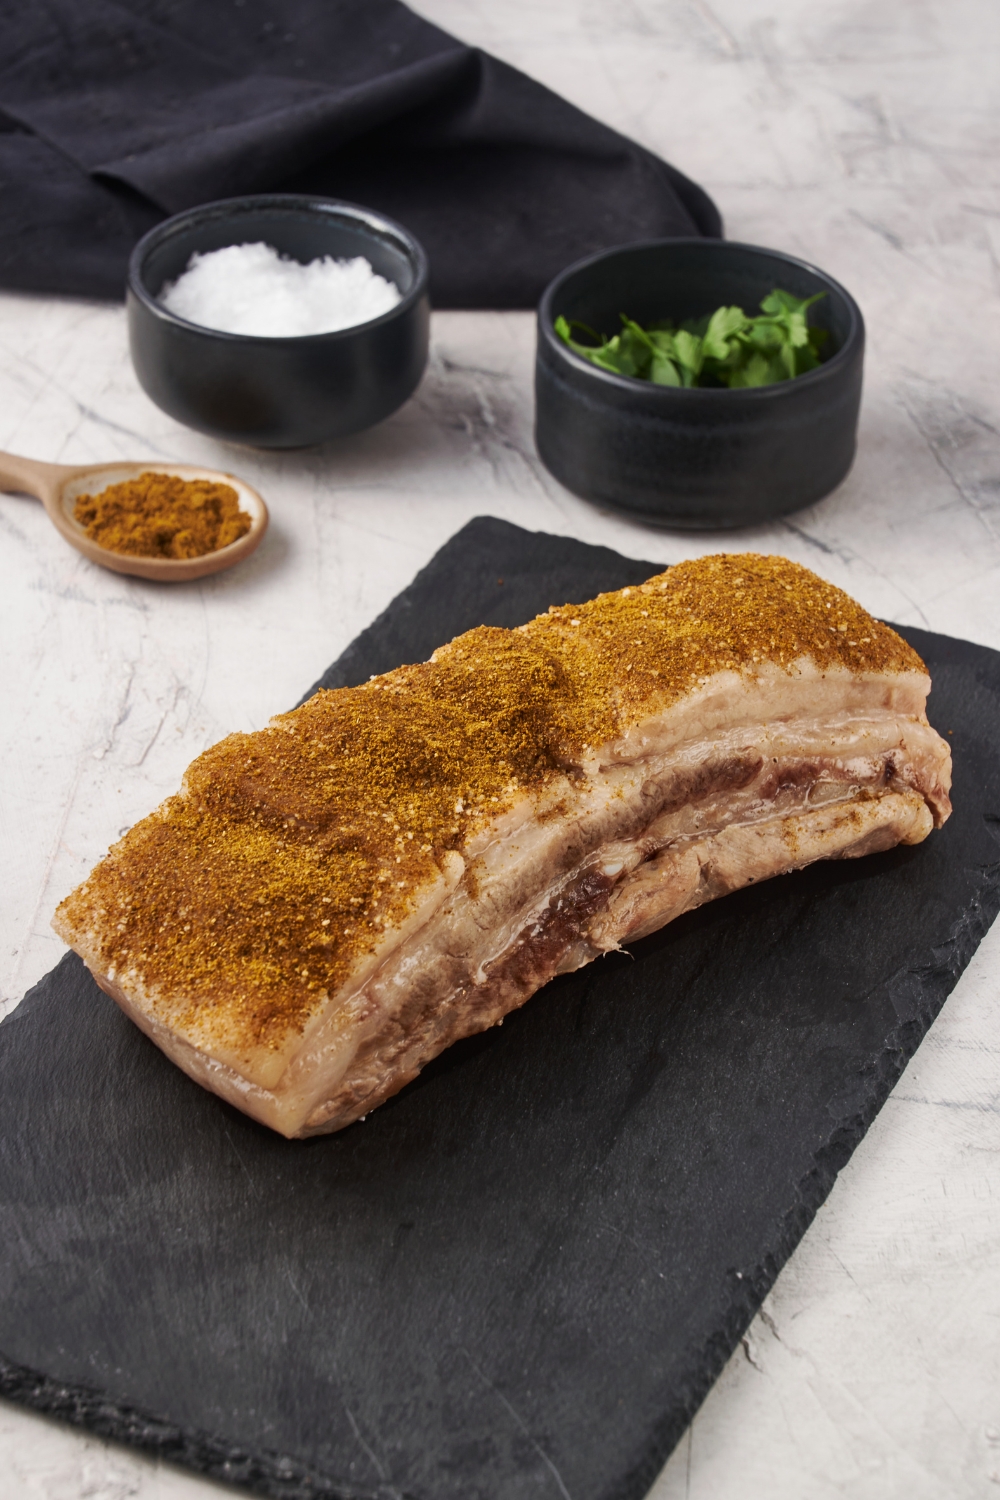 Cooked pork belly covered in a brown spice blend.